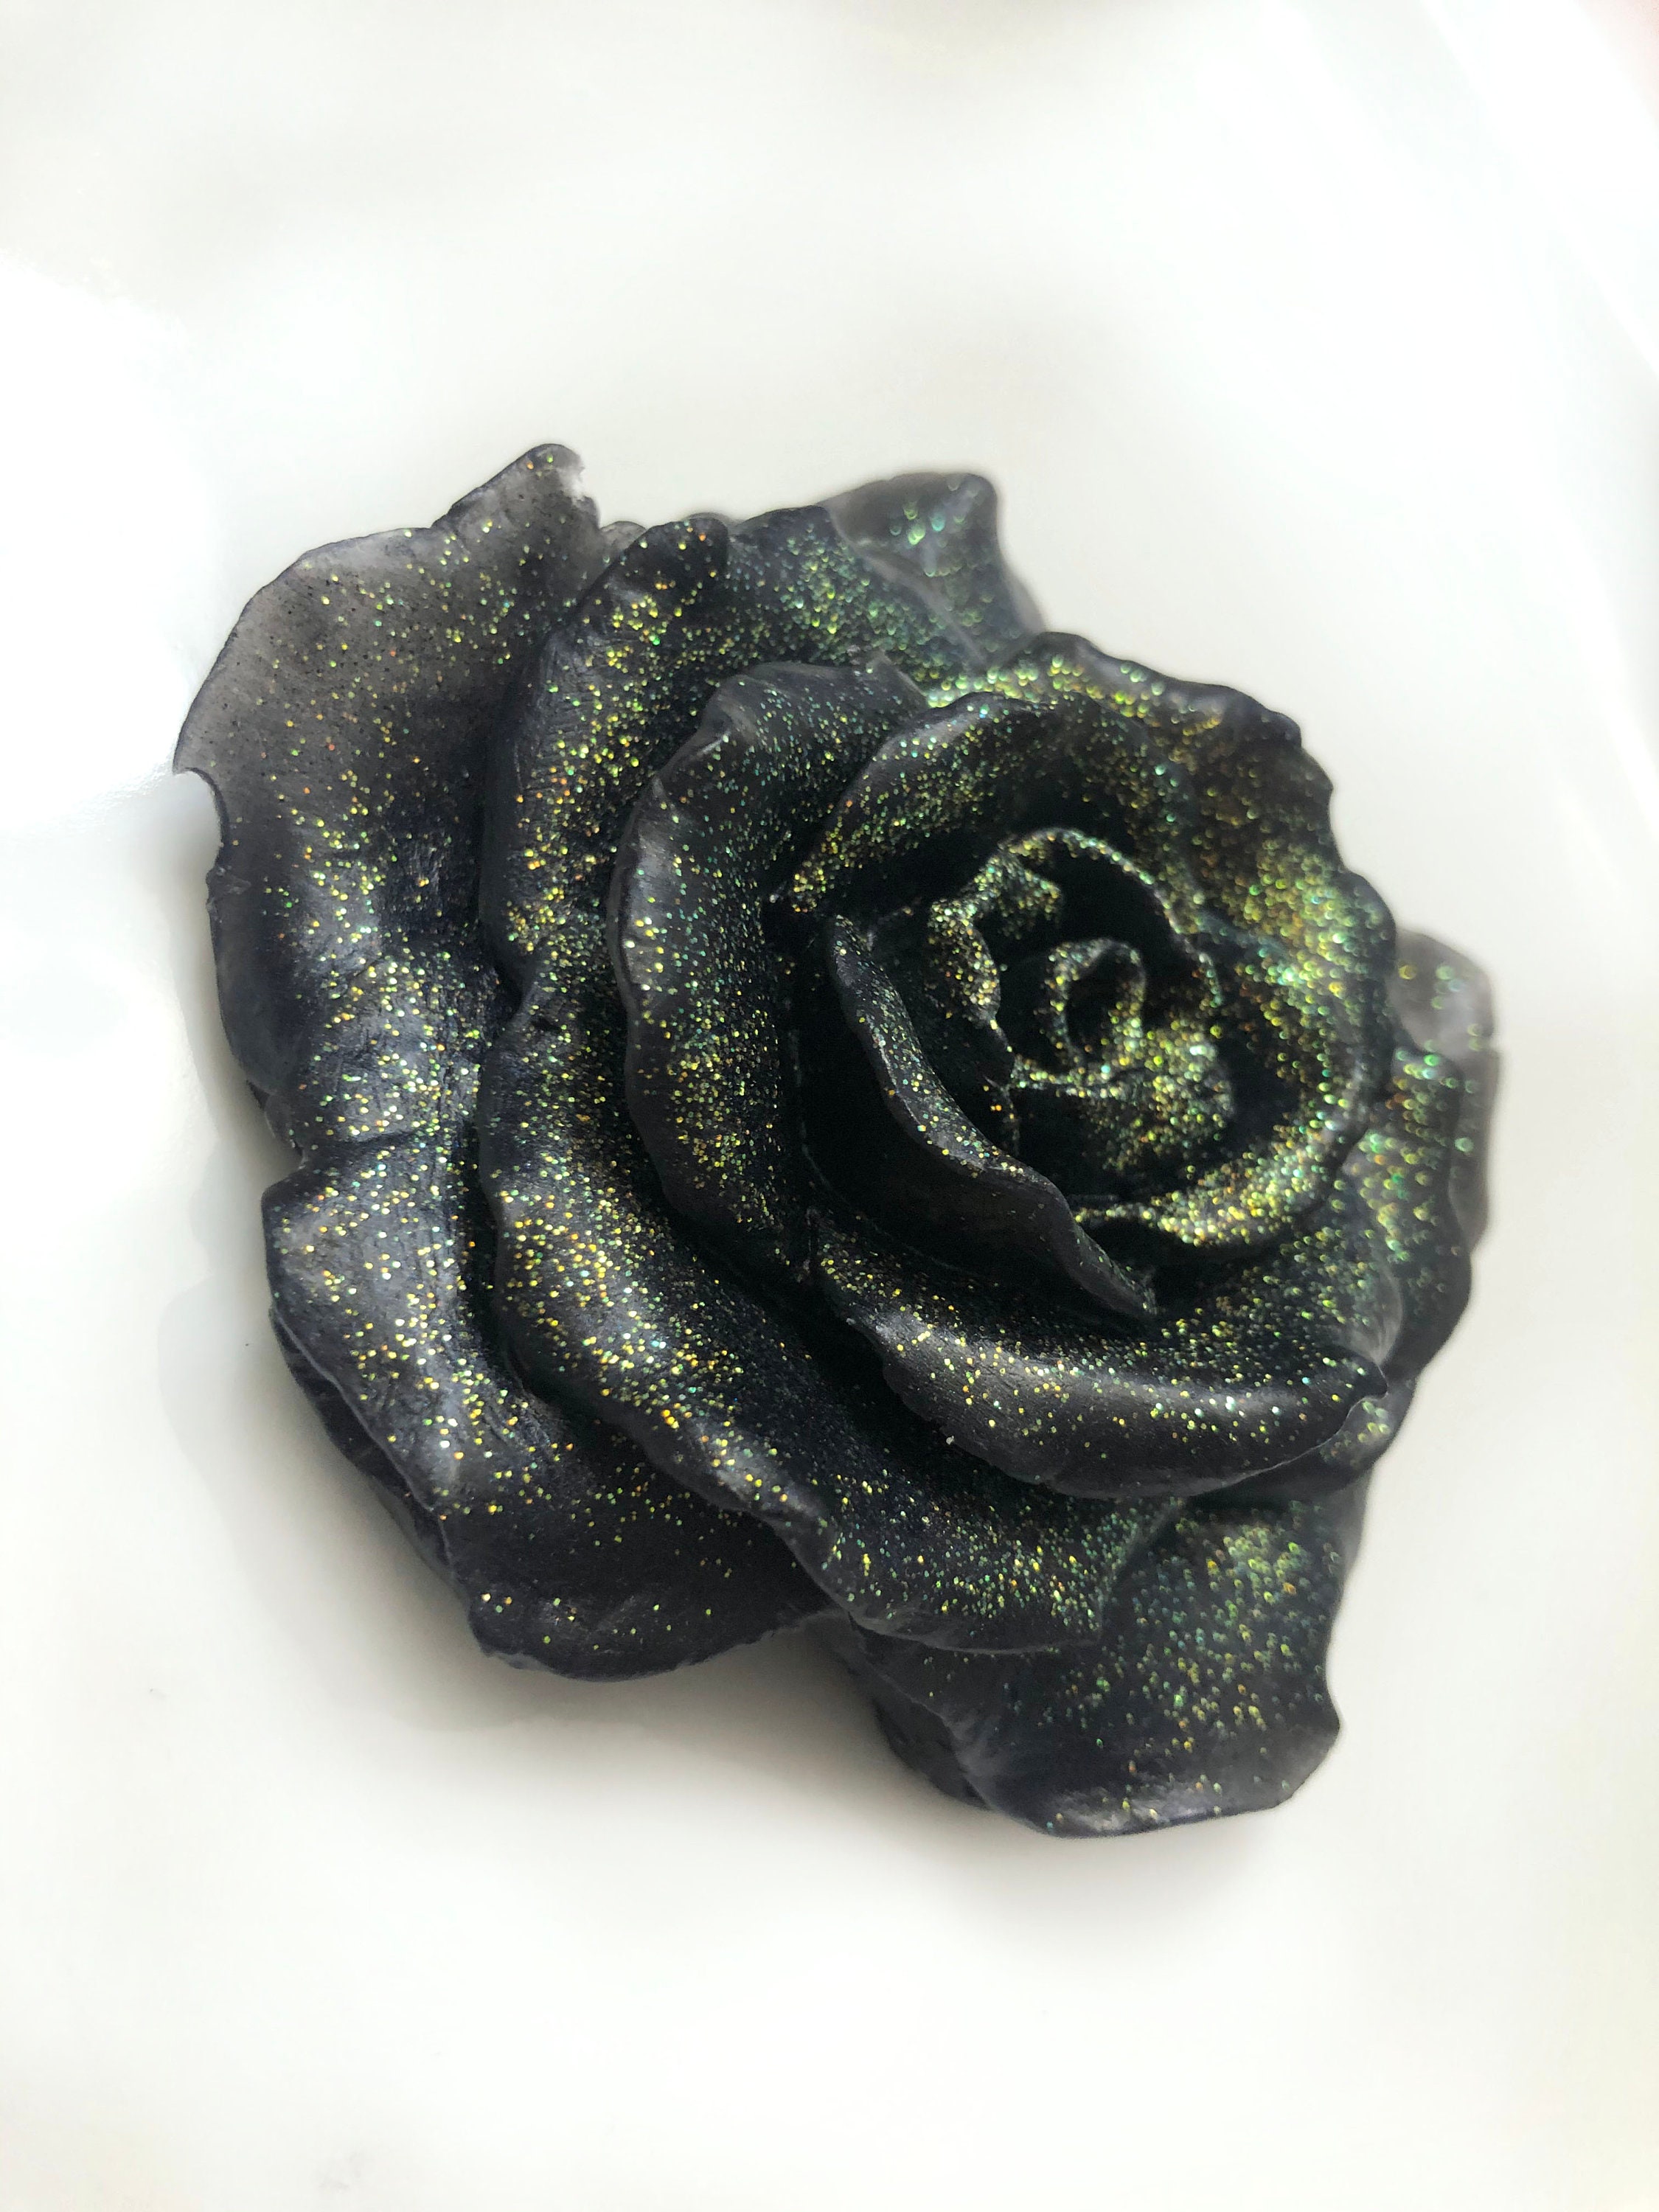 Rose Soap Black Rose Day of the Dead Goth Soap Glitter | Etsy